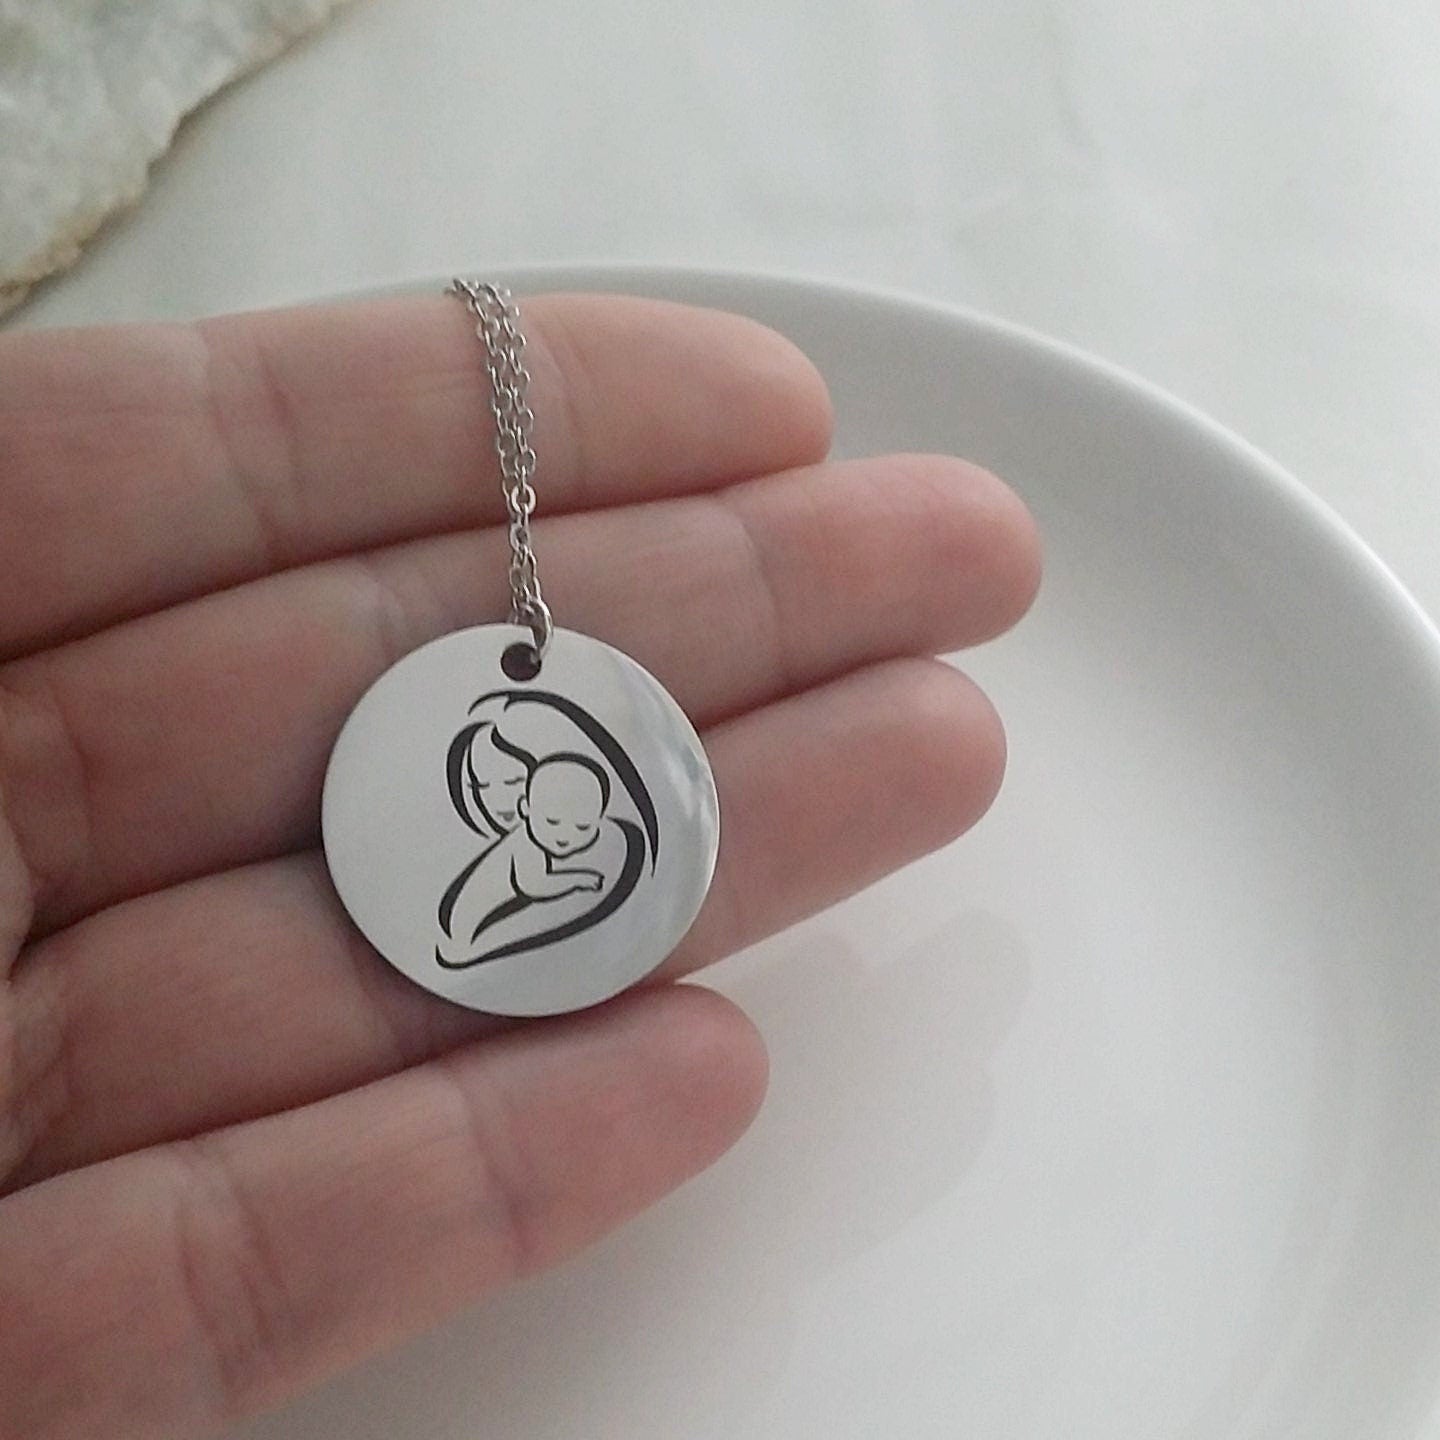 New MOM necklace, First mothers day gift, mom and baby pendant